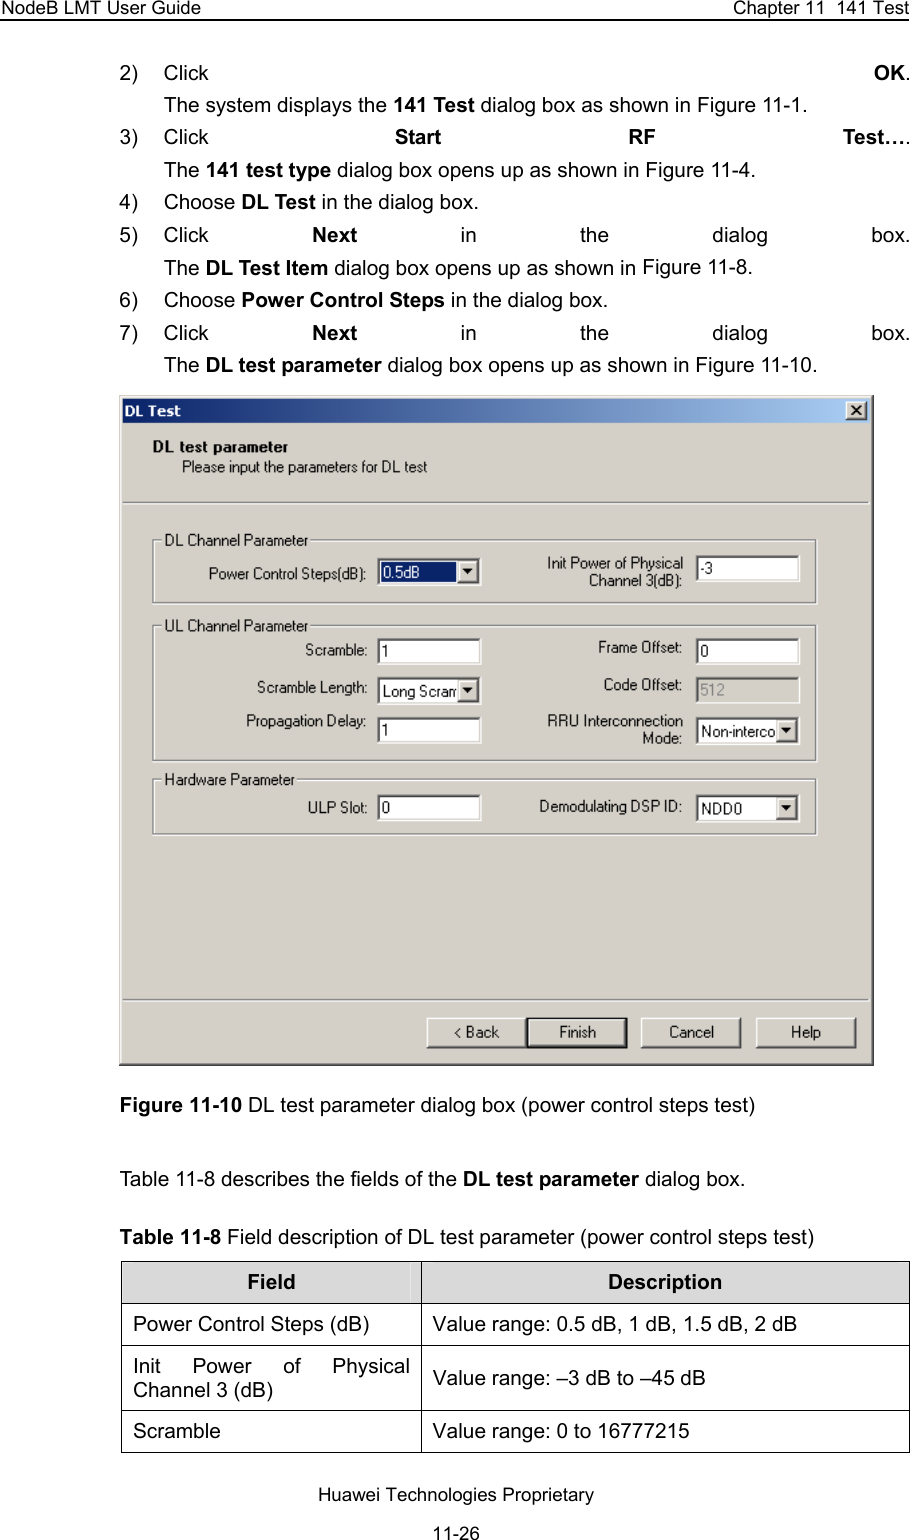 NodeB LMT User Guide  Chapter 11  141 Test 2) Click  OK.  The system displays the 141 Test dialog box as shown in Figure 11-1. 3) Click  Start RF Test….  The 141 test type dialog box opens up as shown in Figure 11-4. 4) Choose DL Test in the dialog box.  5) Click  Next in the dialog box.  The DL Test Item dialog box opens up as shown in Figure 11-8. 6) Choose Power Control Steps in the dialog box. 7) Click  Next in the dialog box.  The DL test parameter dialog box opens up as shown in Figure 11-10.  Figure 11-10 DL test parameter dialog box (power control steps test) Table 11-8 describes the fields of the DL test parameter dialog box. Table 11-8 Field description of DL test parameter (power control steps test)  Field   Description  Power Control Steps (dB)  Value range: 0.5 dB, 1 dB, 1.5 dB, 2 dB Init Power of Physical Channel 3 (dB)  Value range: –3 dB to –45 dB Scramble   Value range: 0 to 16777215 Huawei Technologies Proprietary 11-26 